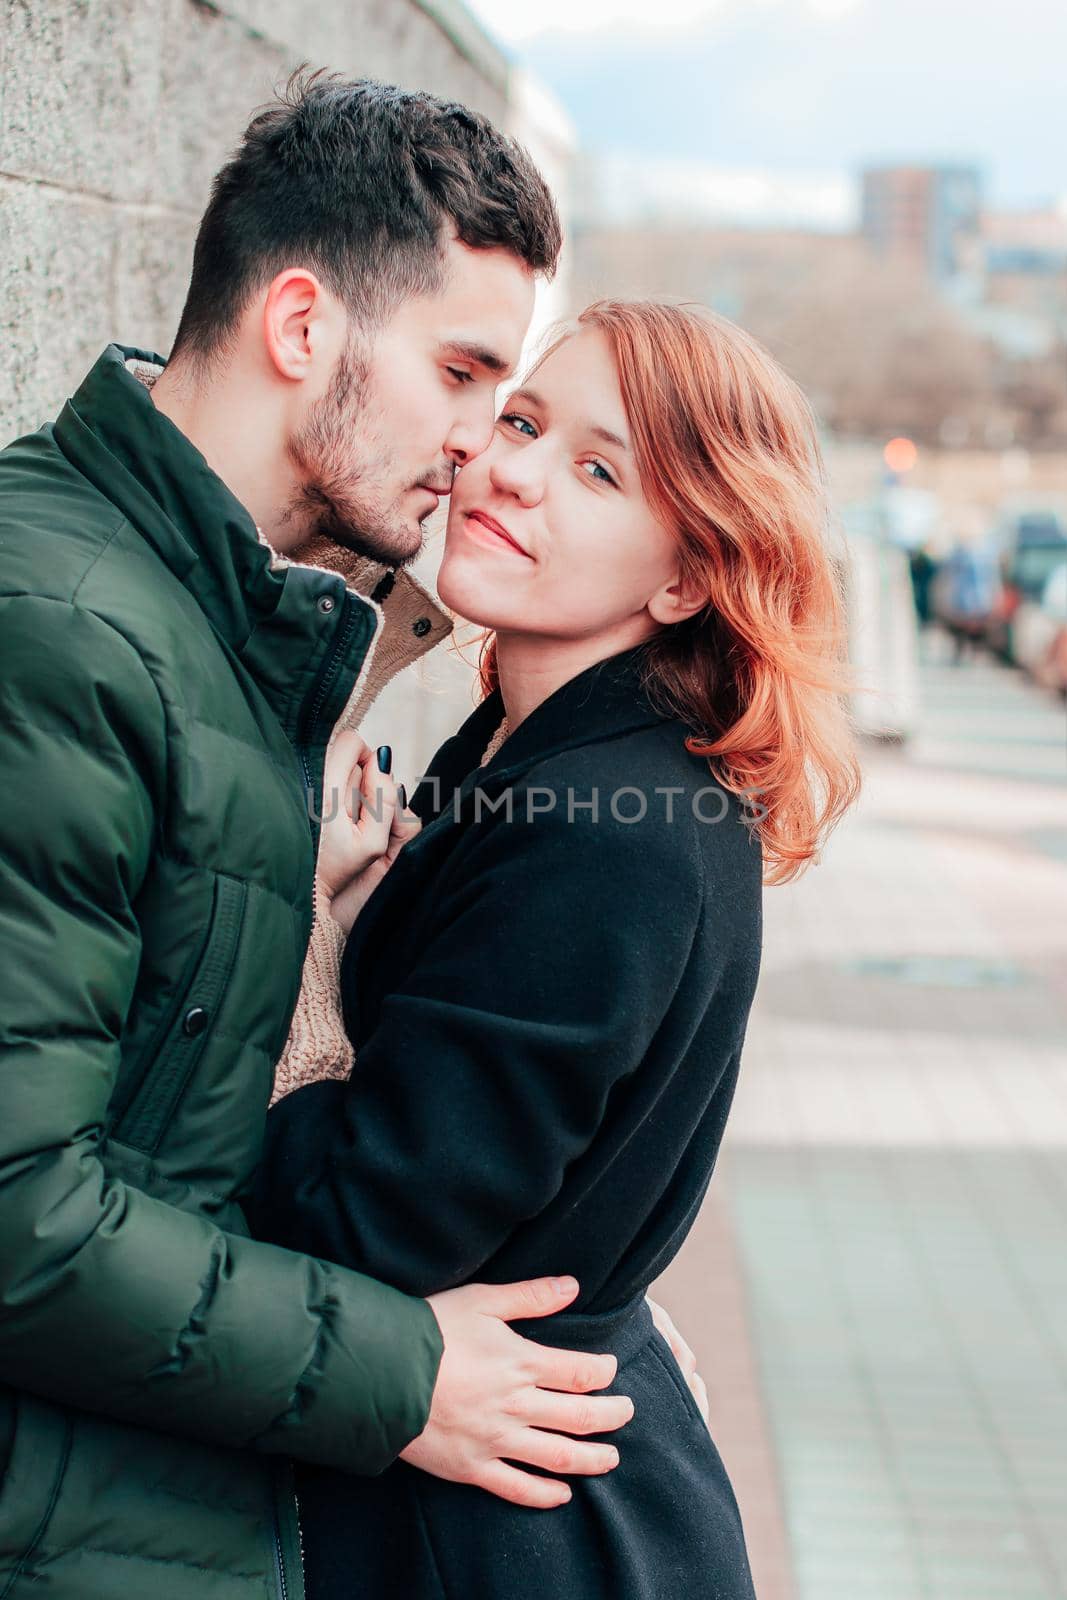 Happy Loving Couple Smiling and Hugging on the Street. Two Happy People Love Story - Medium Shot Portrait